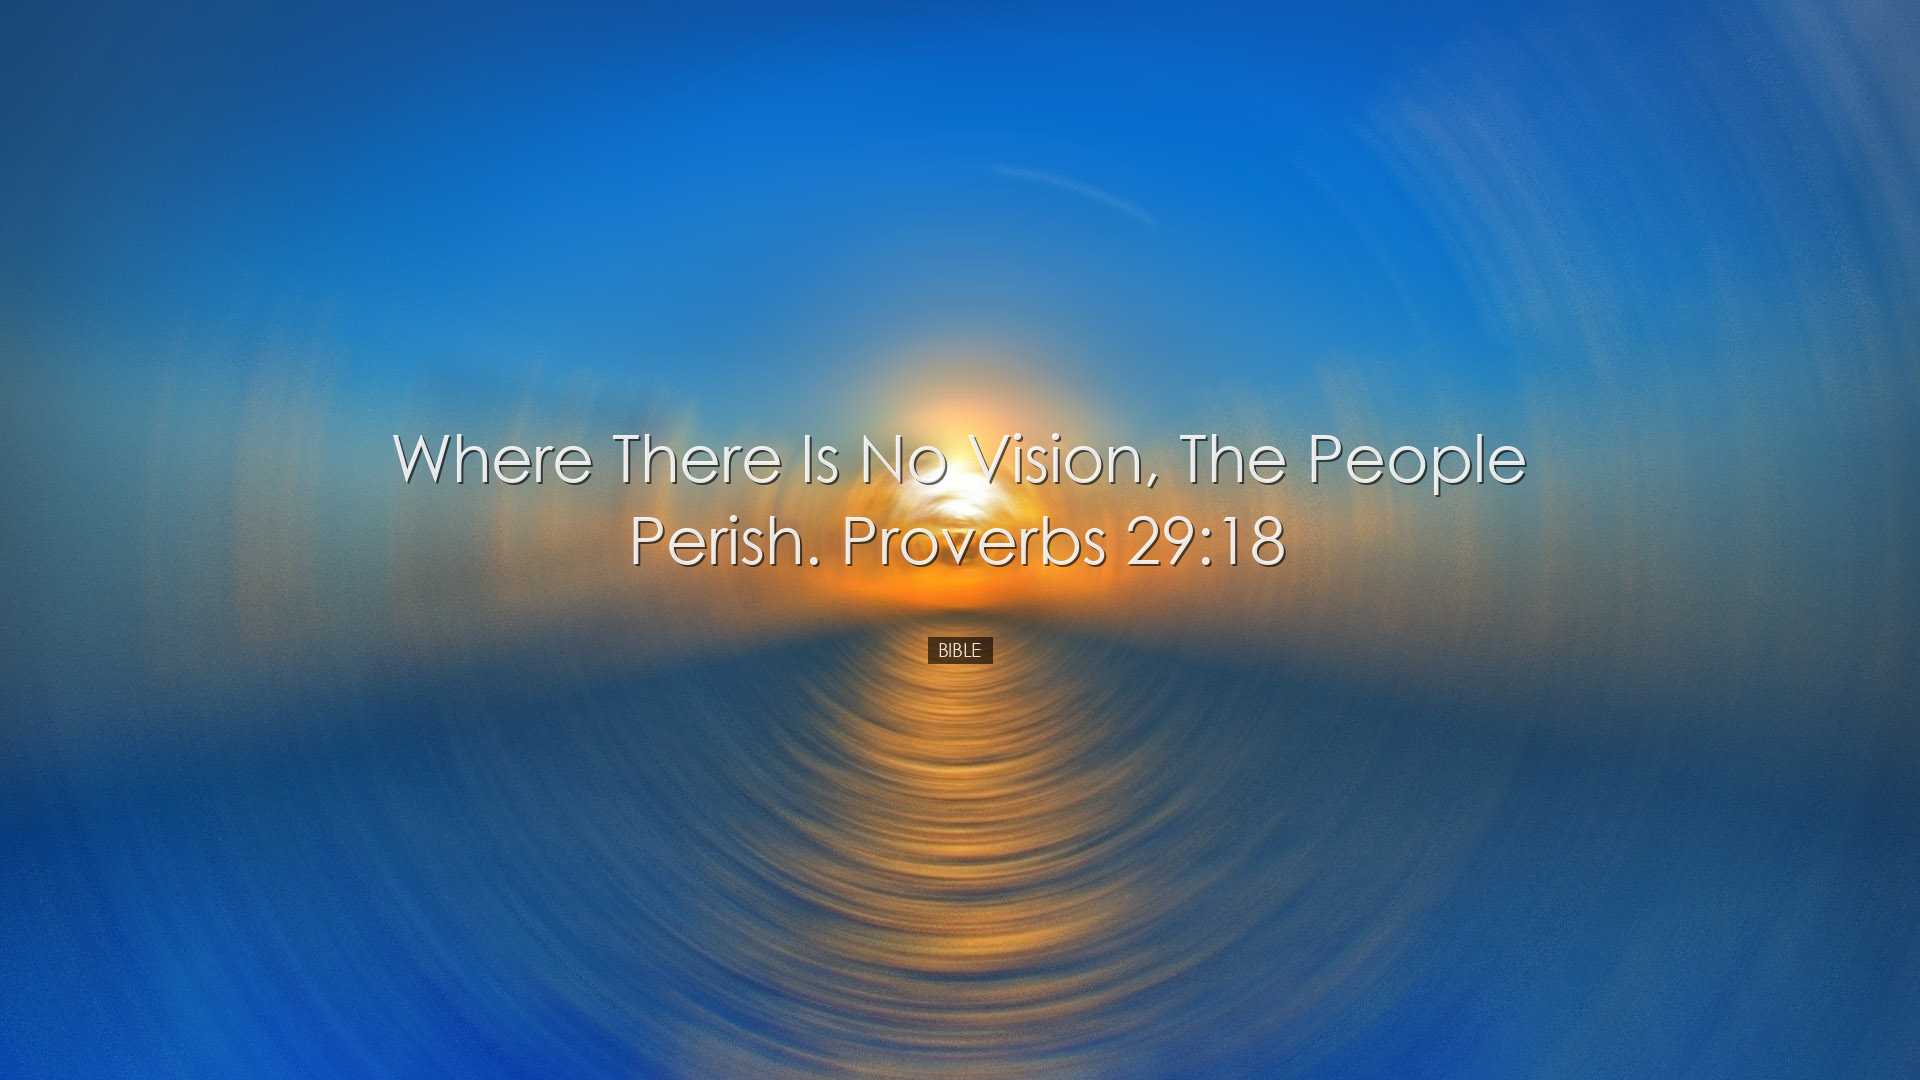 Where there is no vision, the people perish. Proverbs 29:18 - Bibl